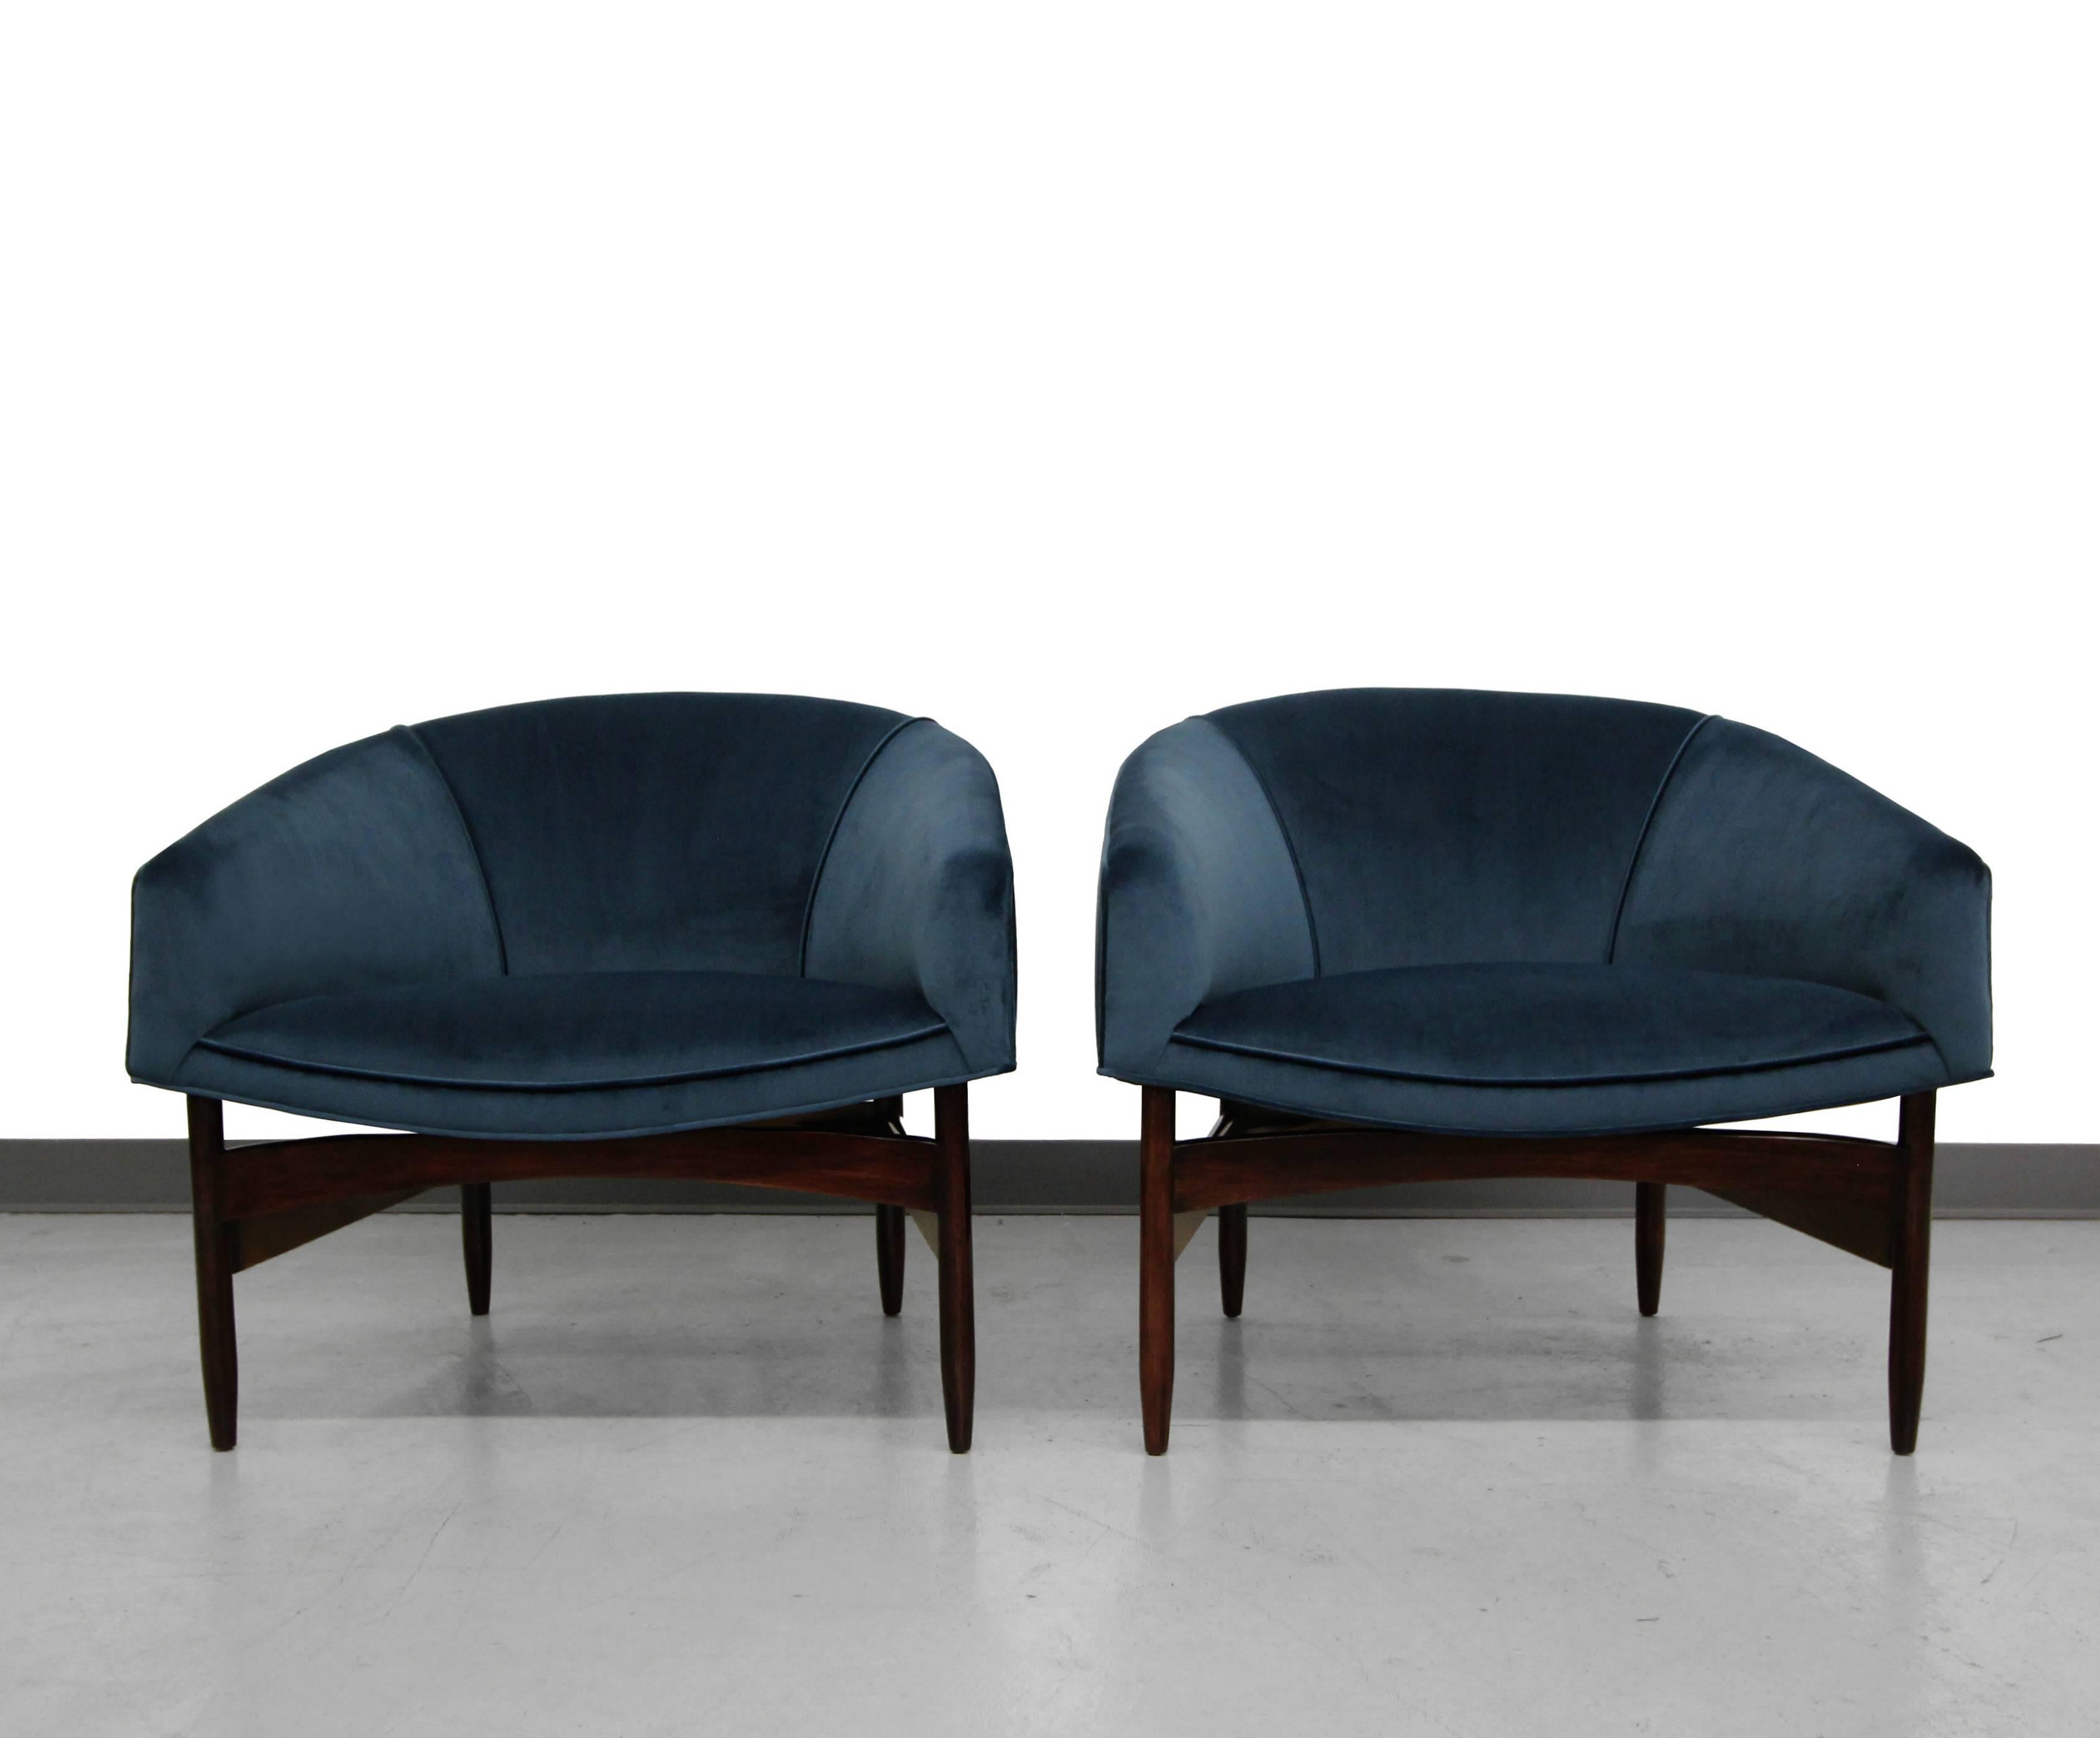 Perfection in a pair of chairs. Designed by Lawrence Peabody, this pair is ideal. Everything about these chairs is perfect. Gorgeous barrel backs, new dark teal, blue velvet upholstery and sculpted wood bases. These are so Classic they will mesh in